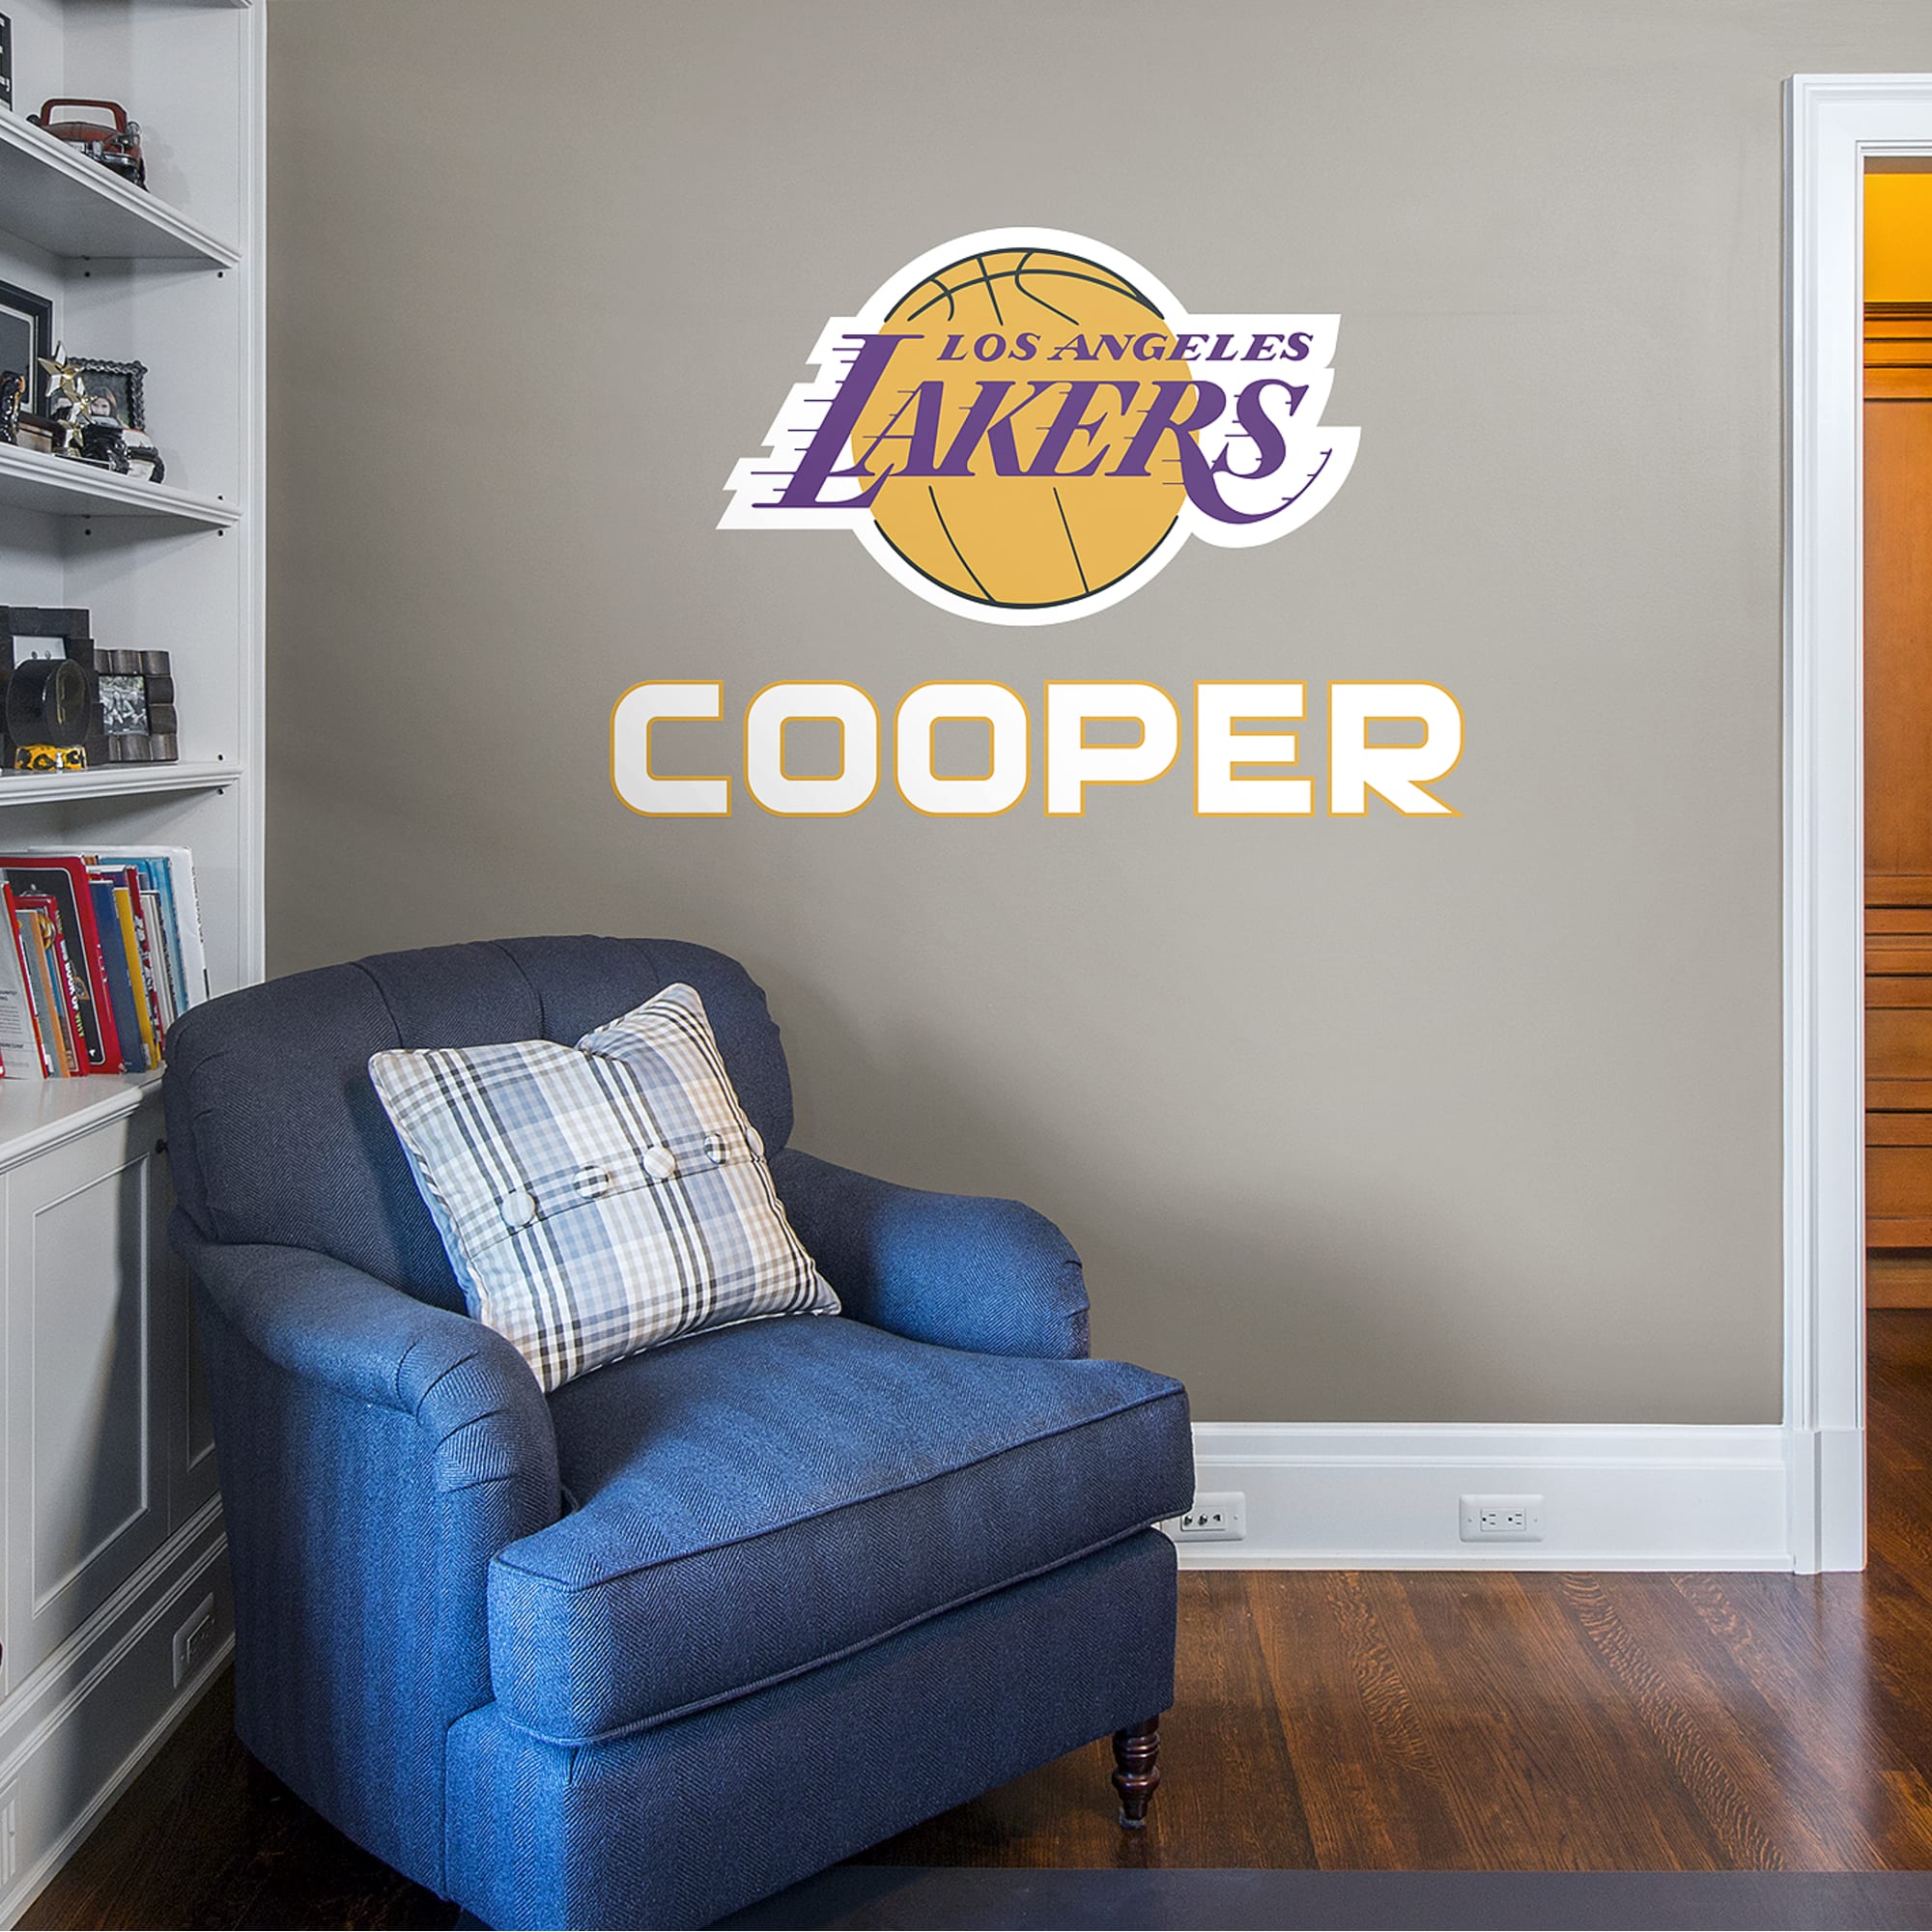 Los Angeles Lakers: Stacked Personalized Name - Officially Licensed NBA Transfer Decal in White (52"W x 39.5"H) by Fathead | Vin